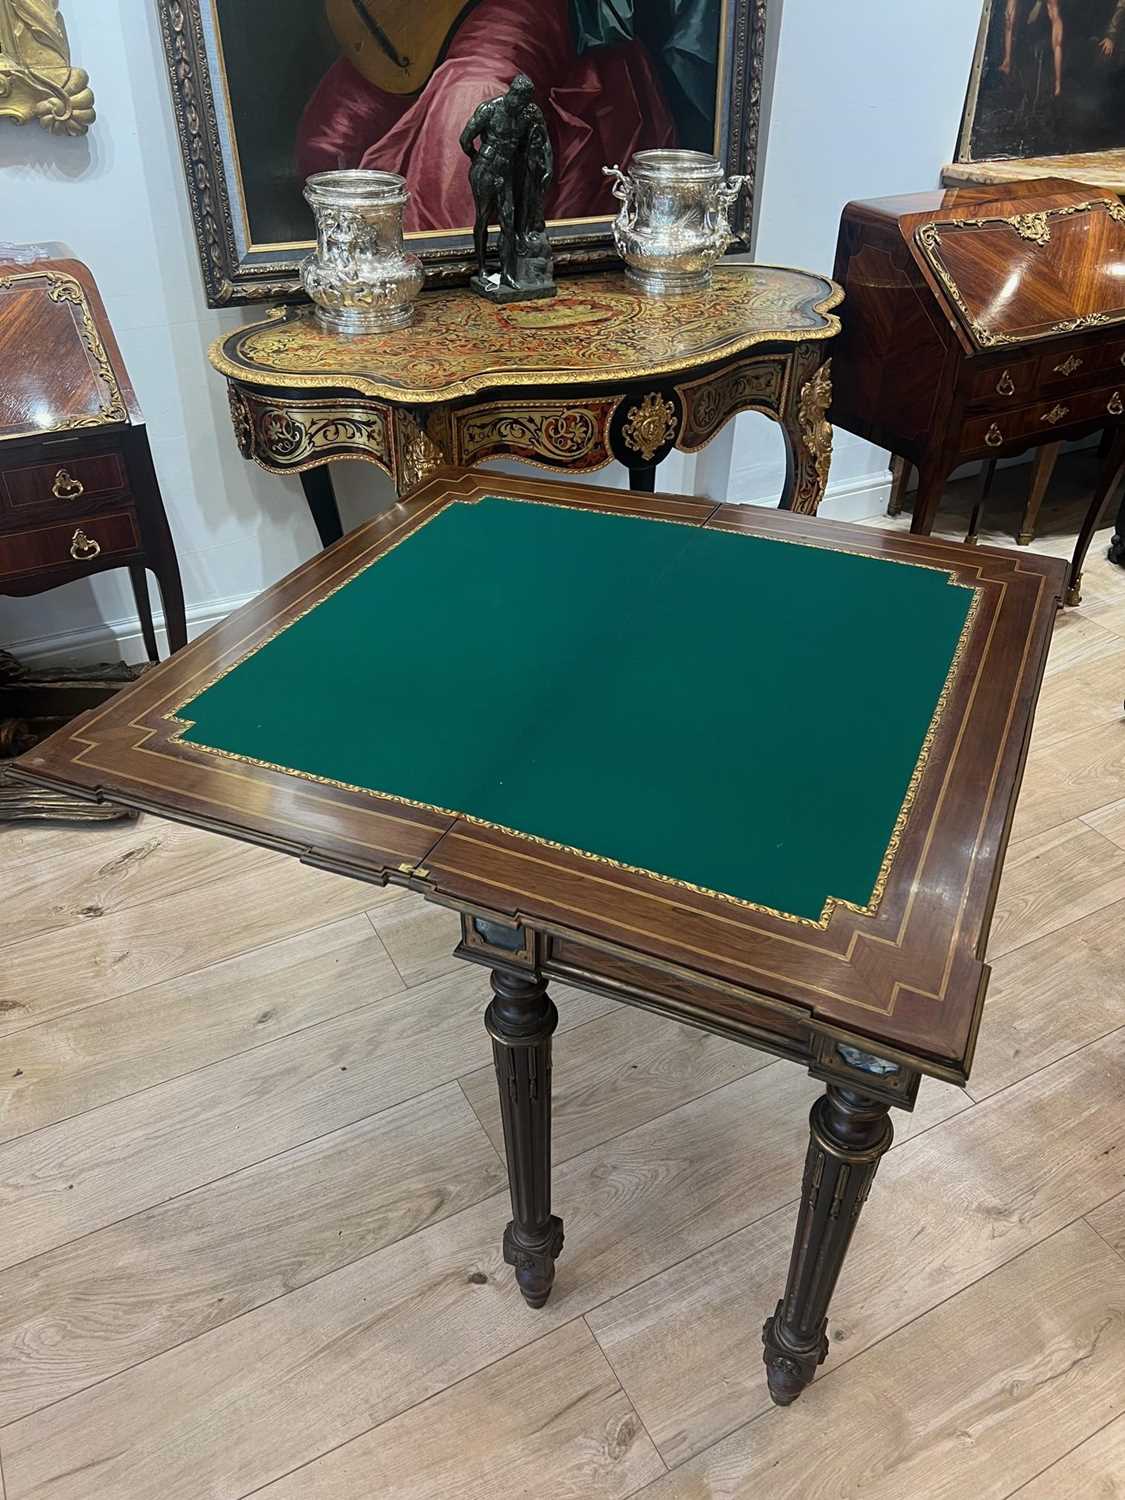 A 19TH CENTURY FRENCH HARDSTONE INLAID, ORMOLU MOUNTED AND MARQUETRY GAMES TABLE - Image 4 of 4